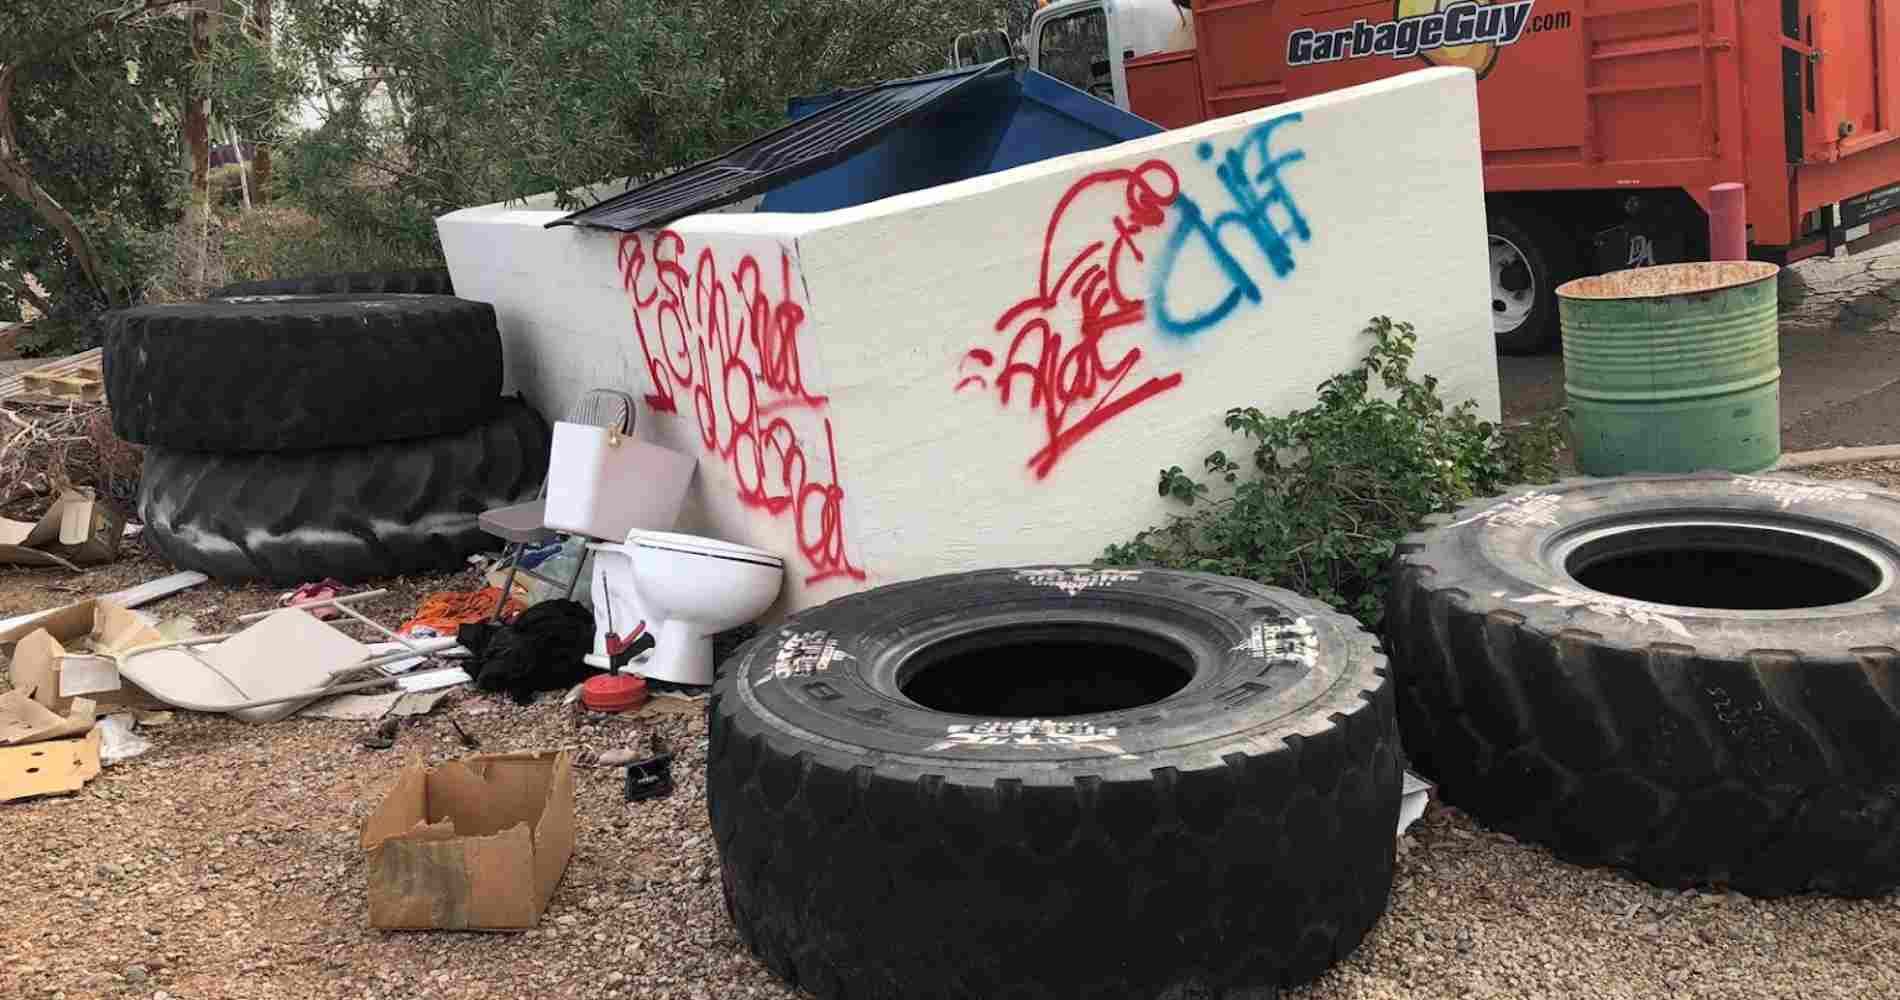 #1 for Tire Disposal in San Tan Valley, AZ with Over 1200 5-Star Reviews!